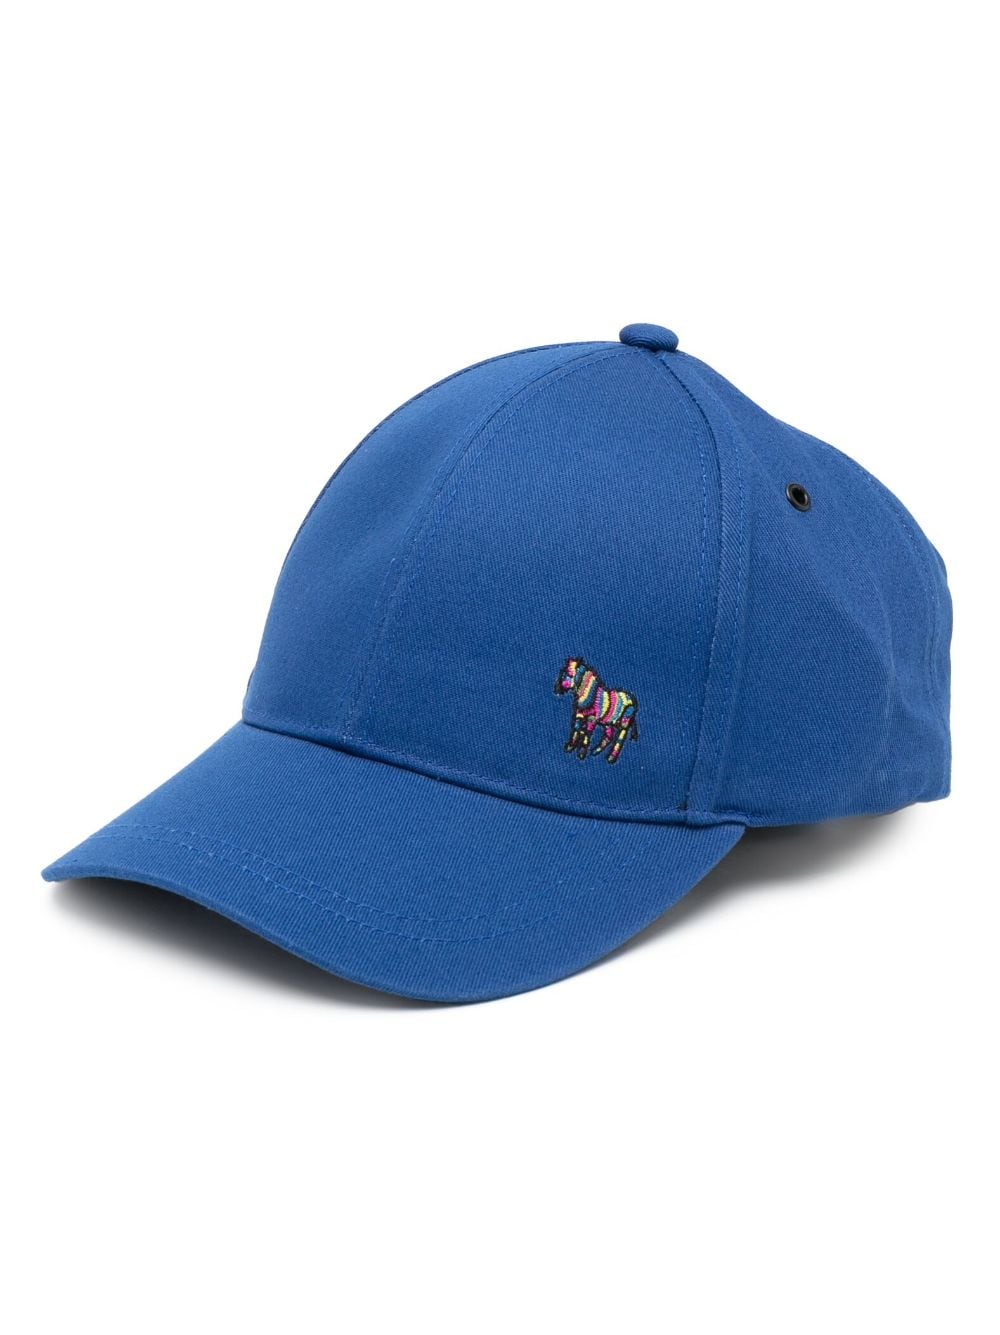 PS By Paul Smith Hats Blue